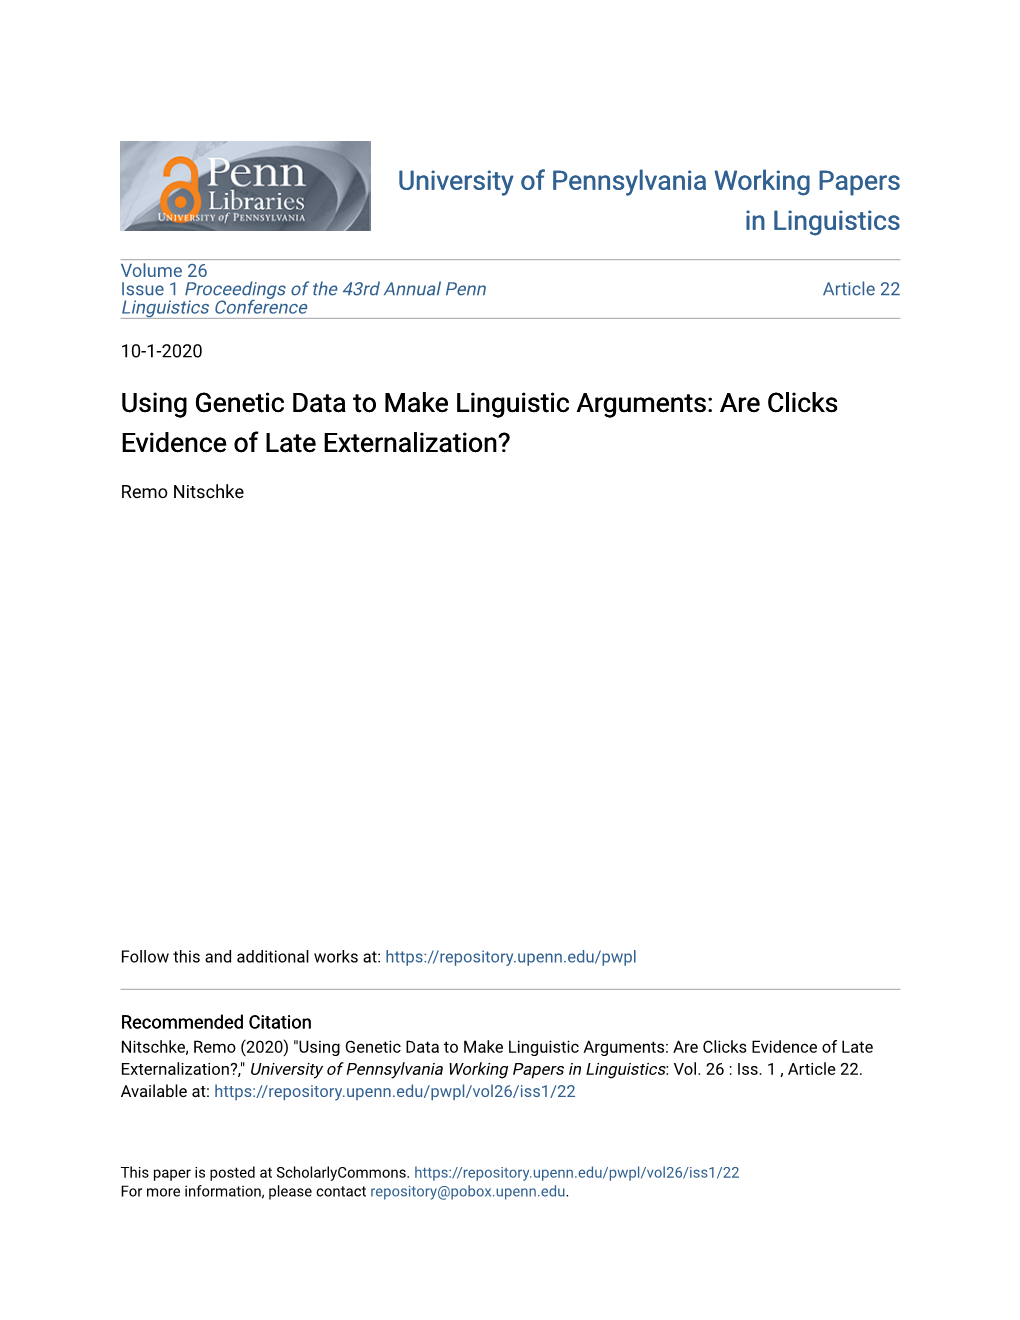 Using Genetic Data to Make Linguistic Arguments: Are Clicks Evidence of Late Externalization?